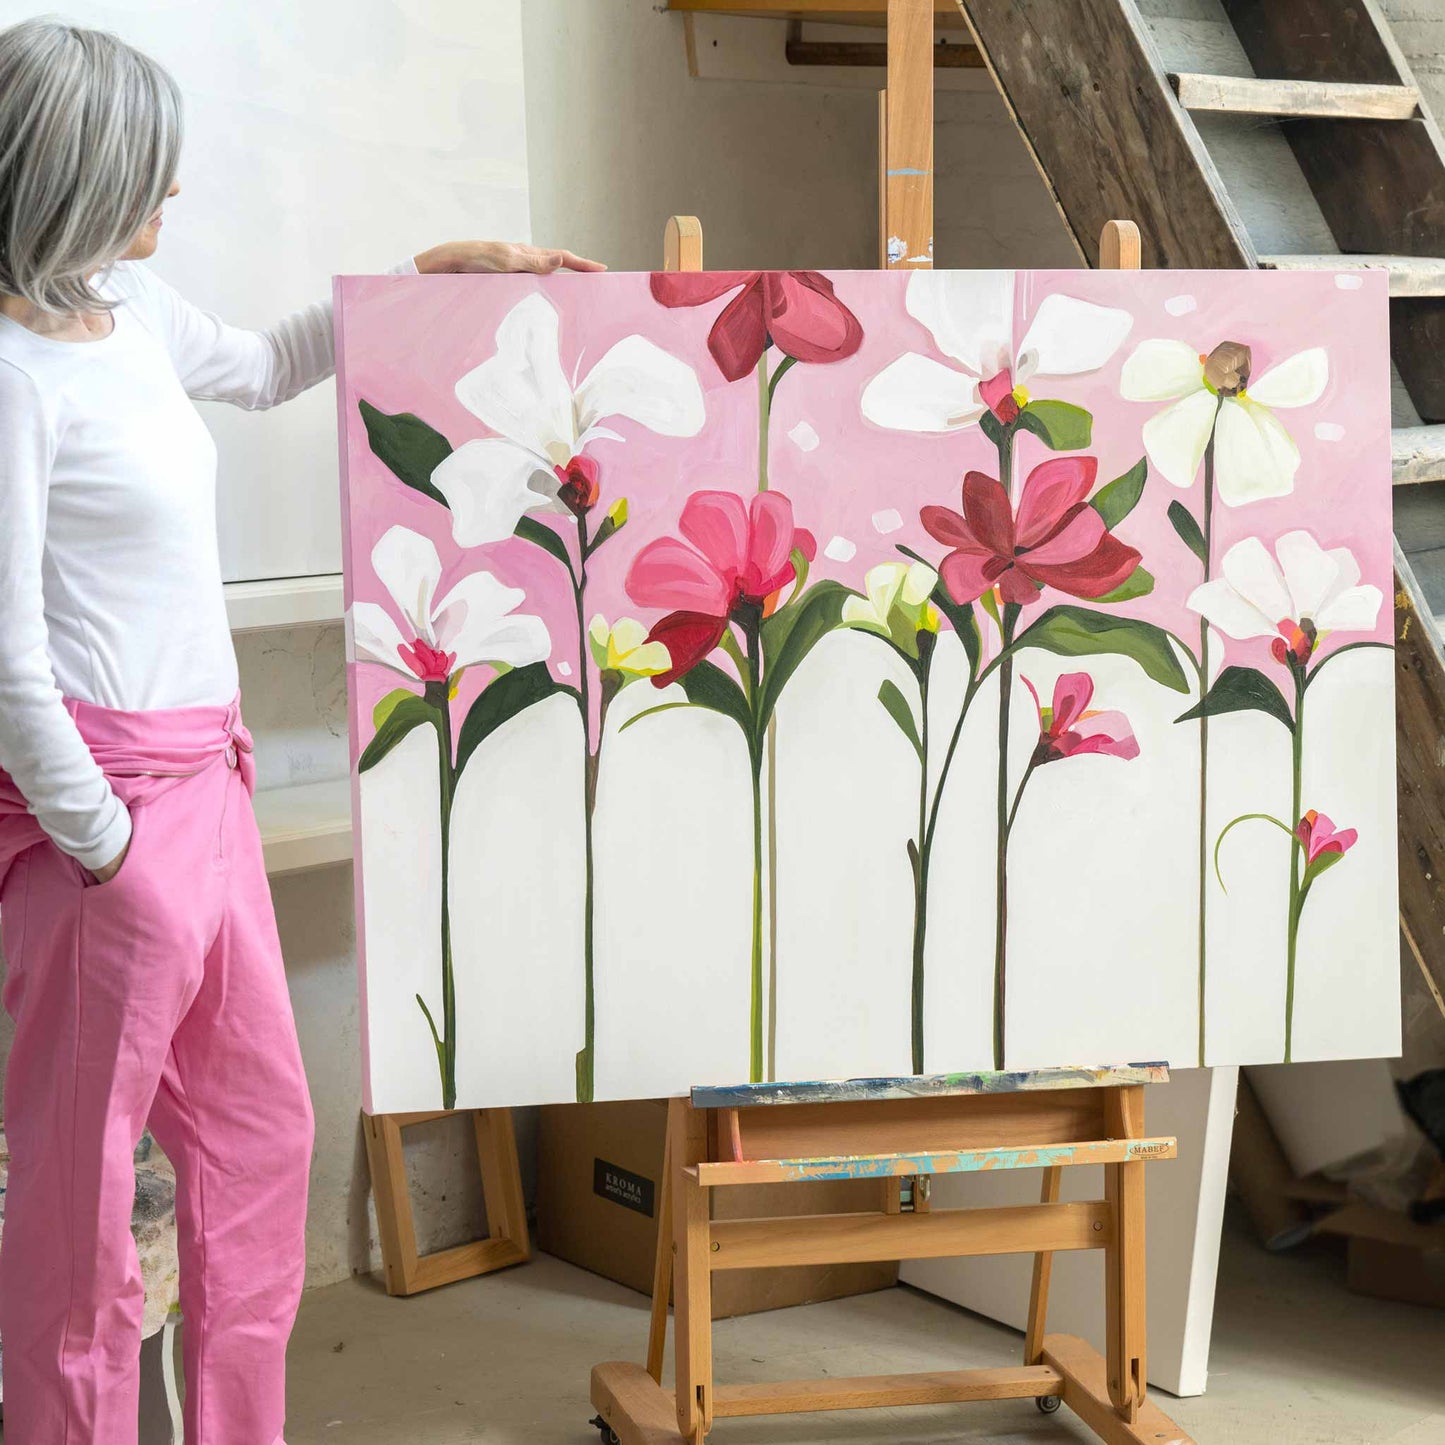 artist next to pink acrylic florwer painting on canvas in studio